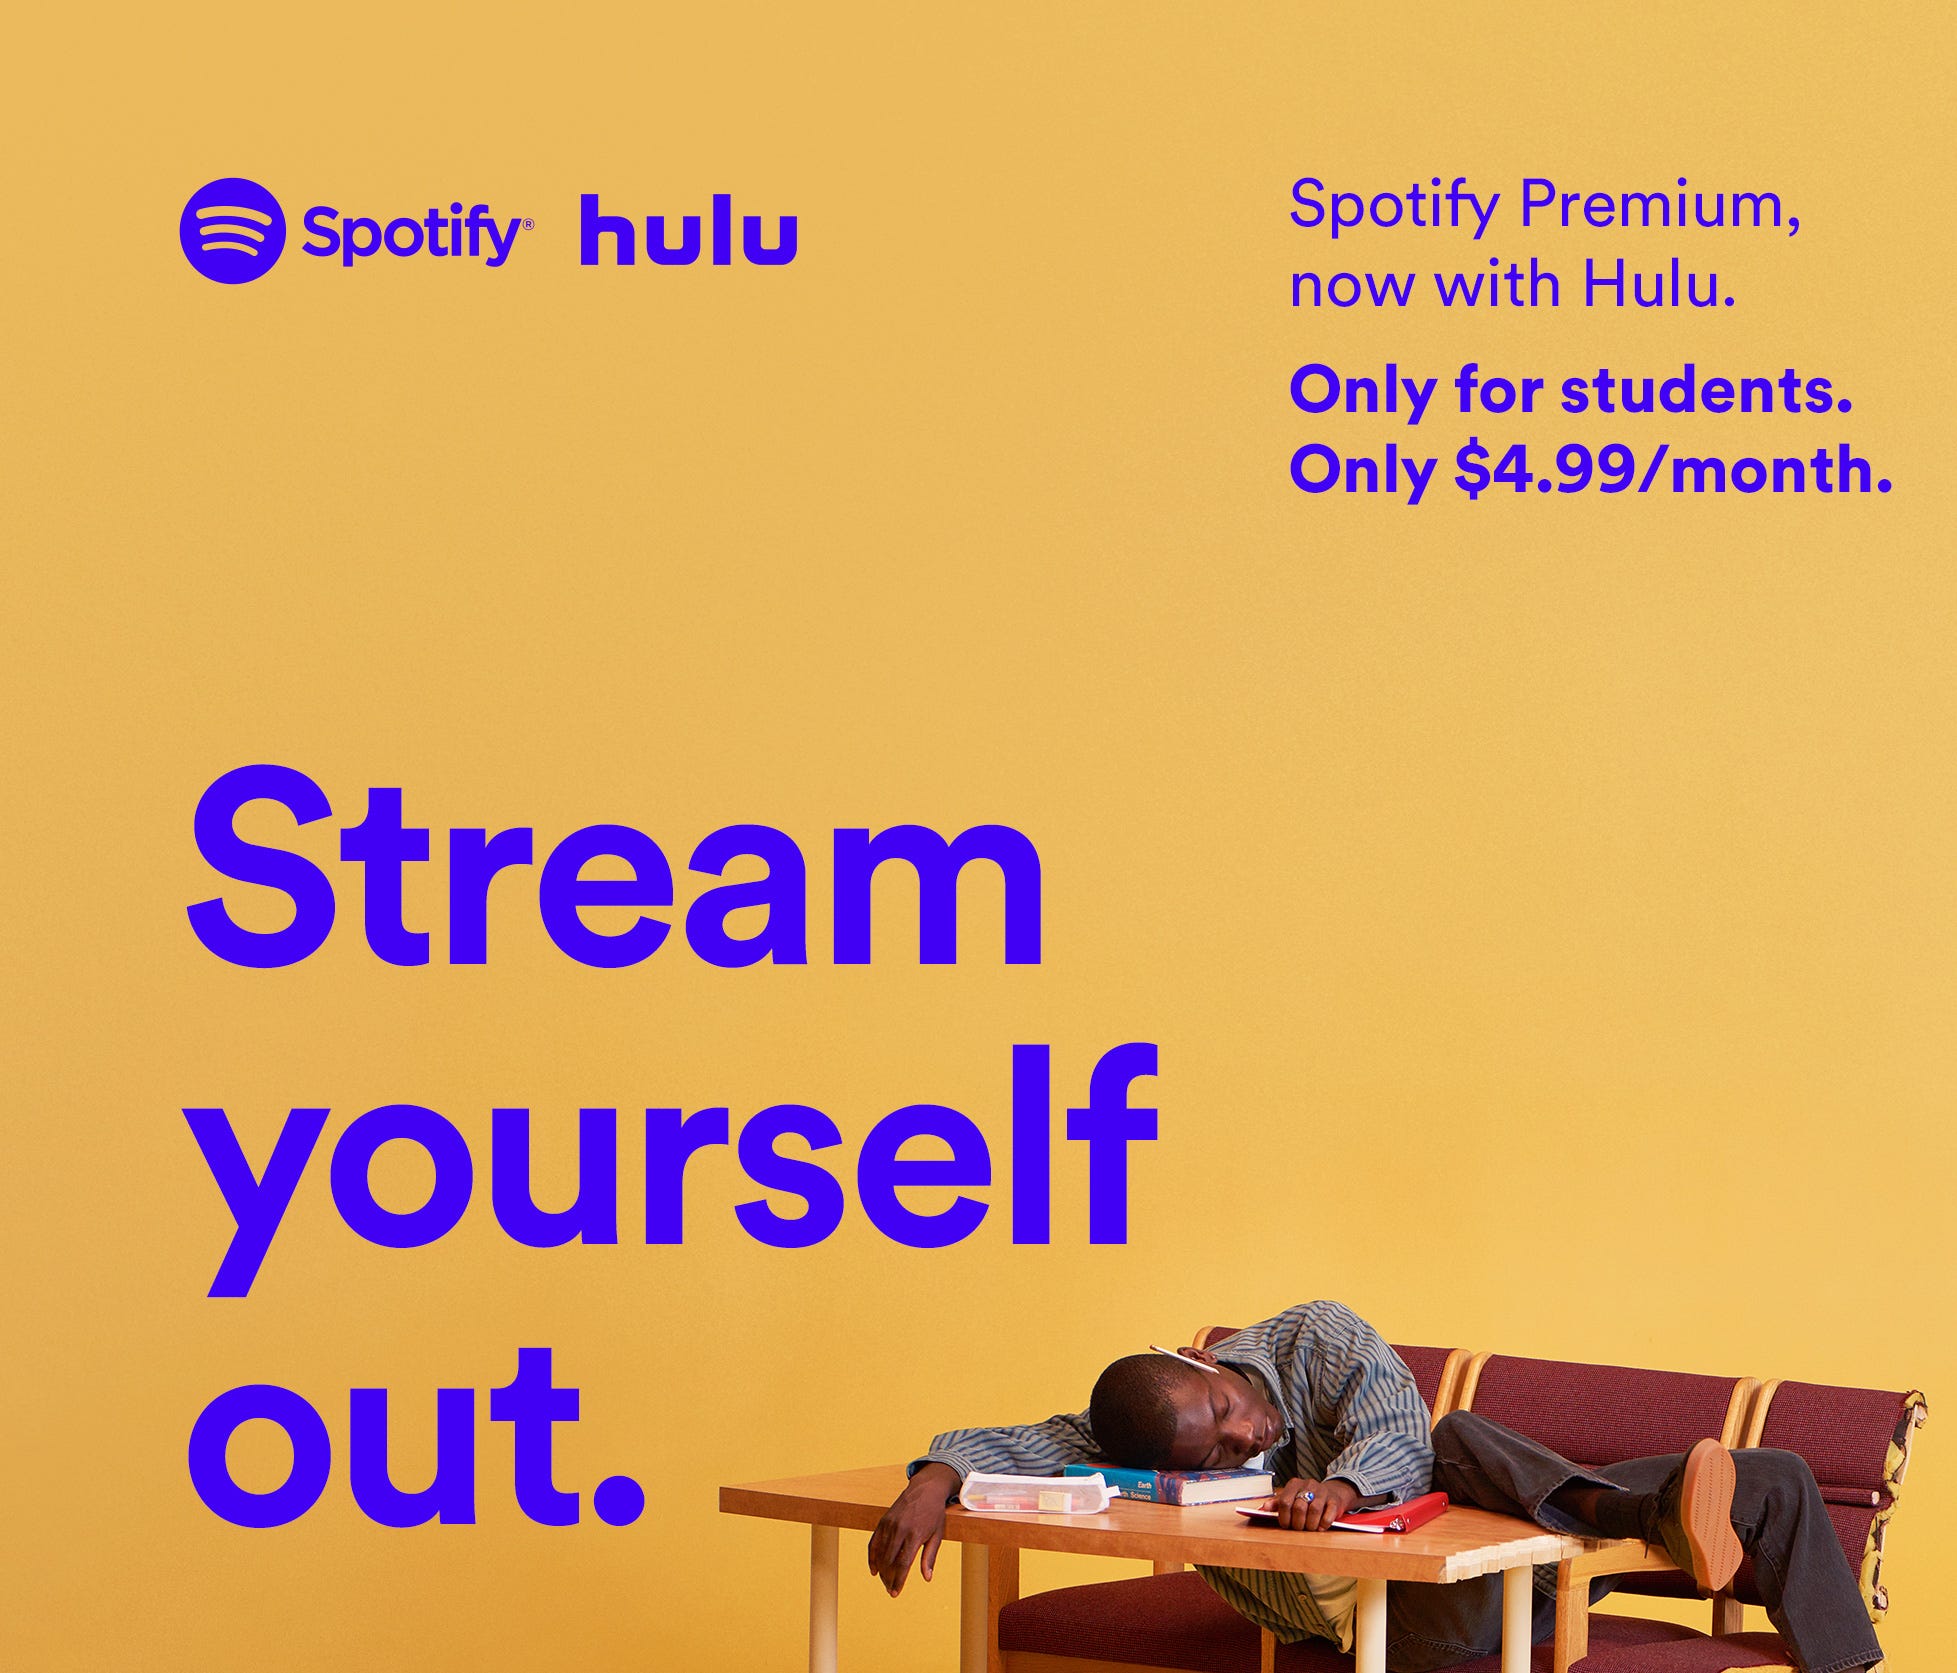 Music streaming service Spotify and video streaming service Hulu have teamed up on a low-priced $4.99 subscription plan for students.